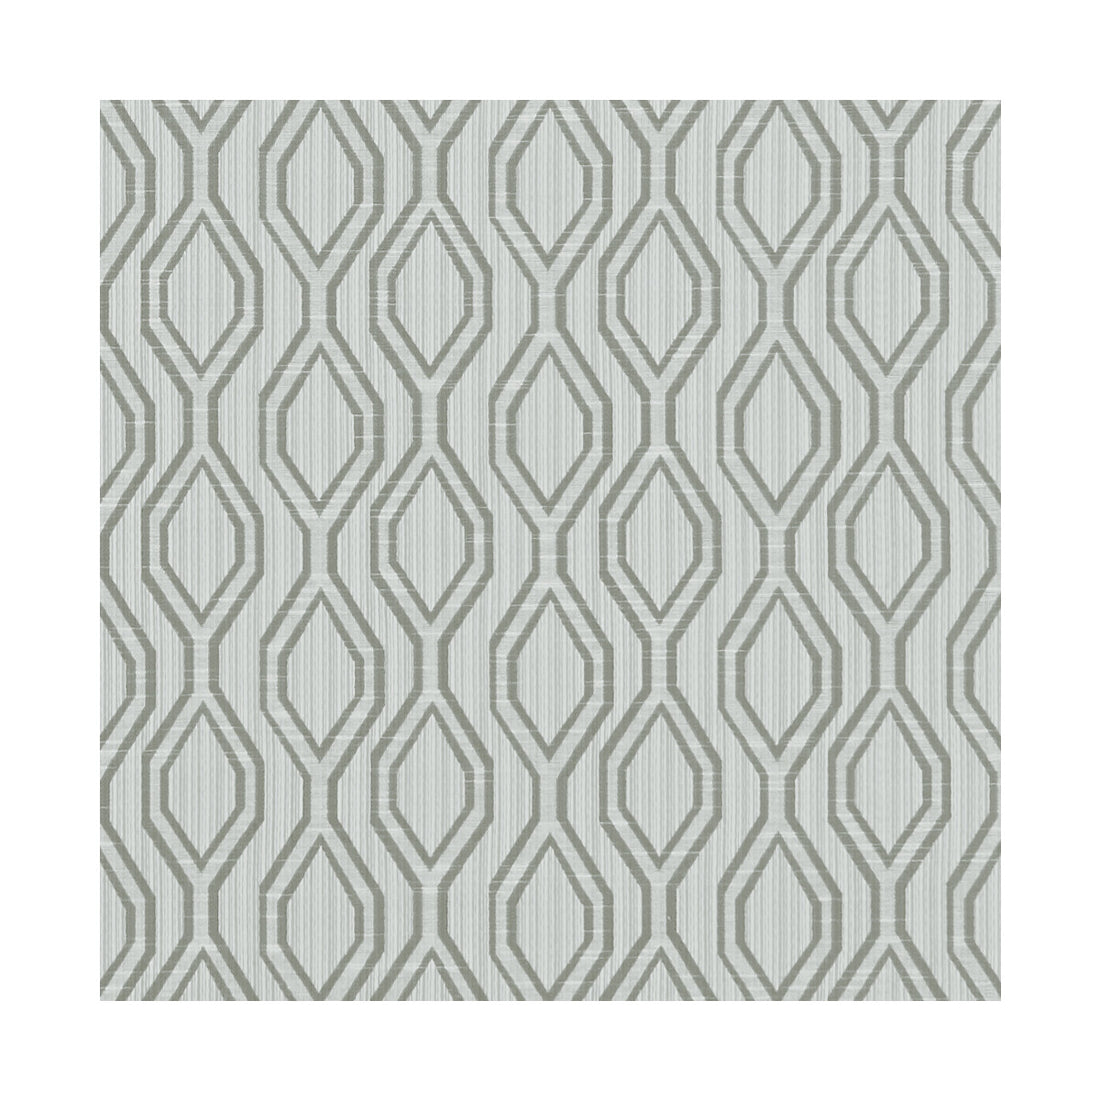 Hadley fabric in silver color - pattern F1237/07.CAC.0 - by Clarke And Clarke in the Marbury By Studio G For C&amp;C collection